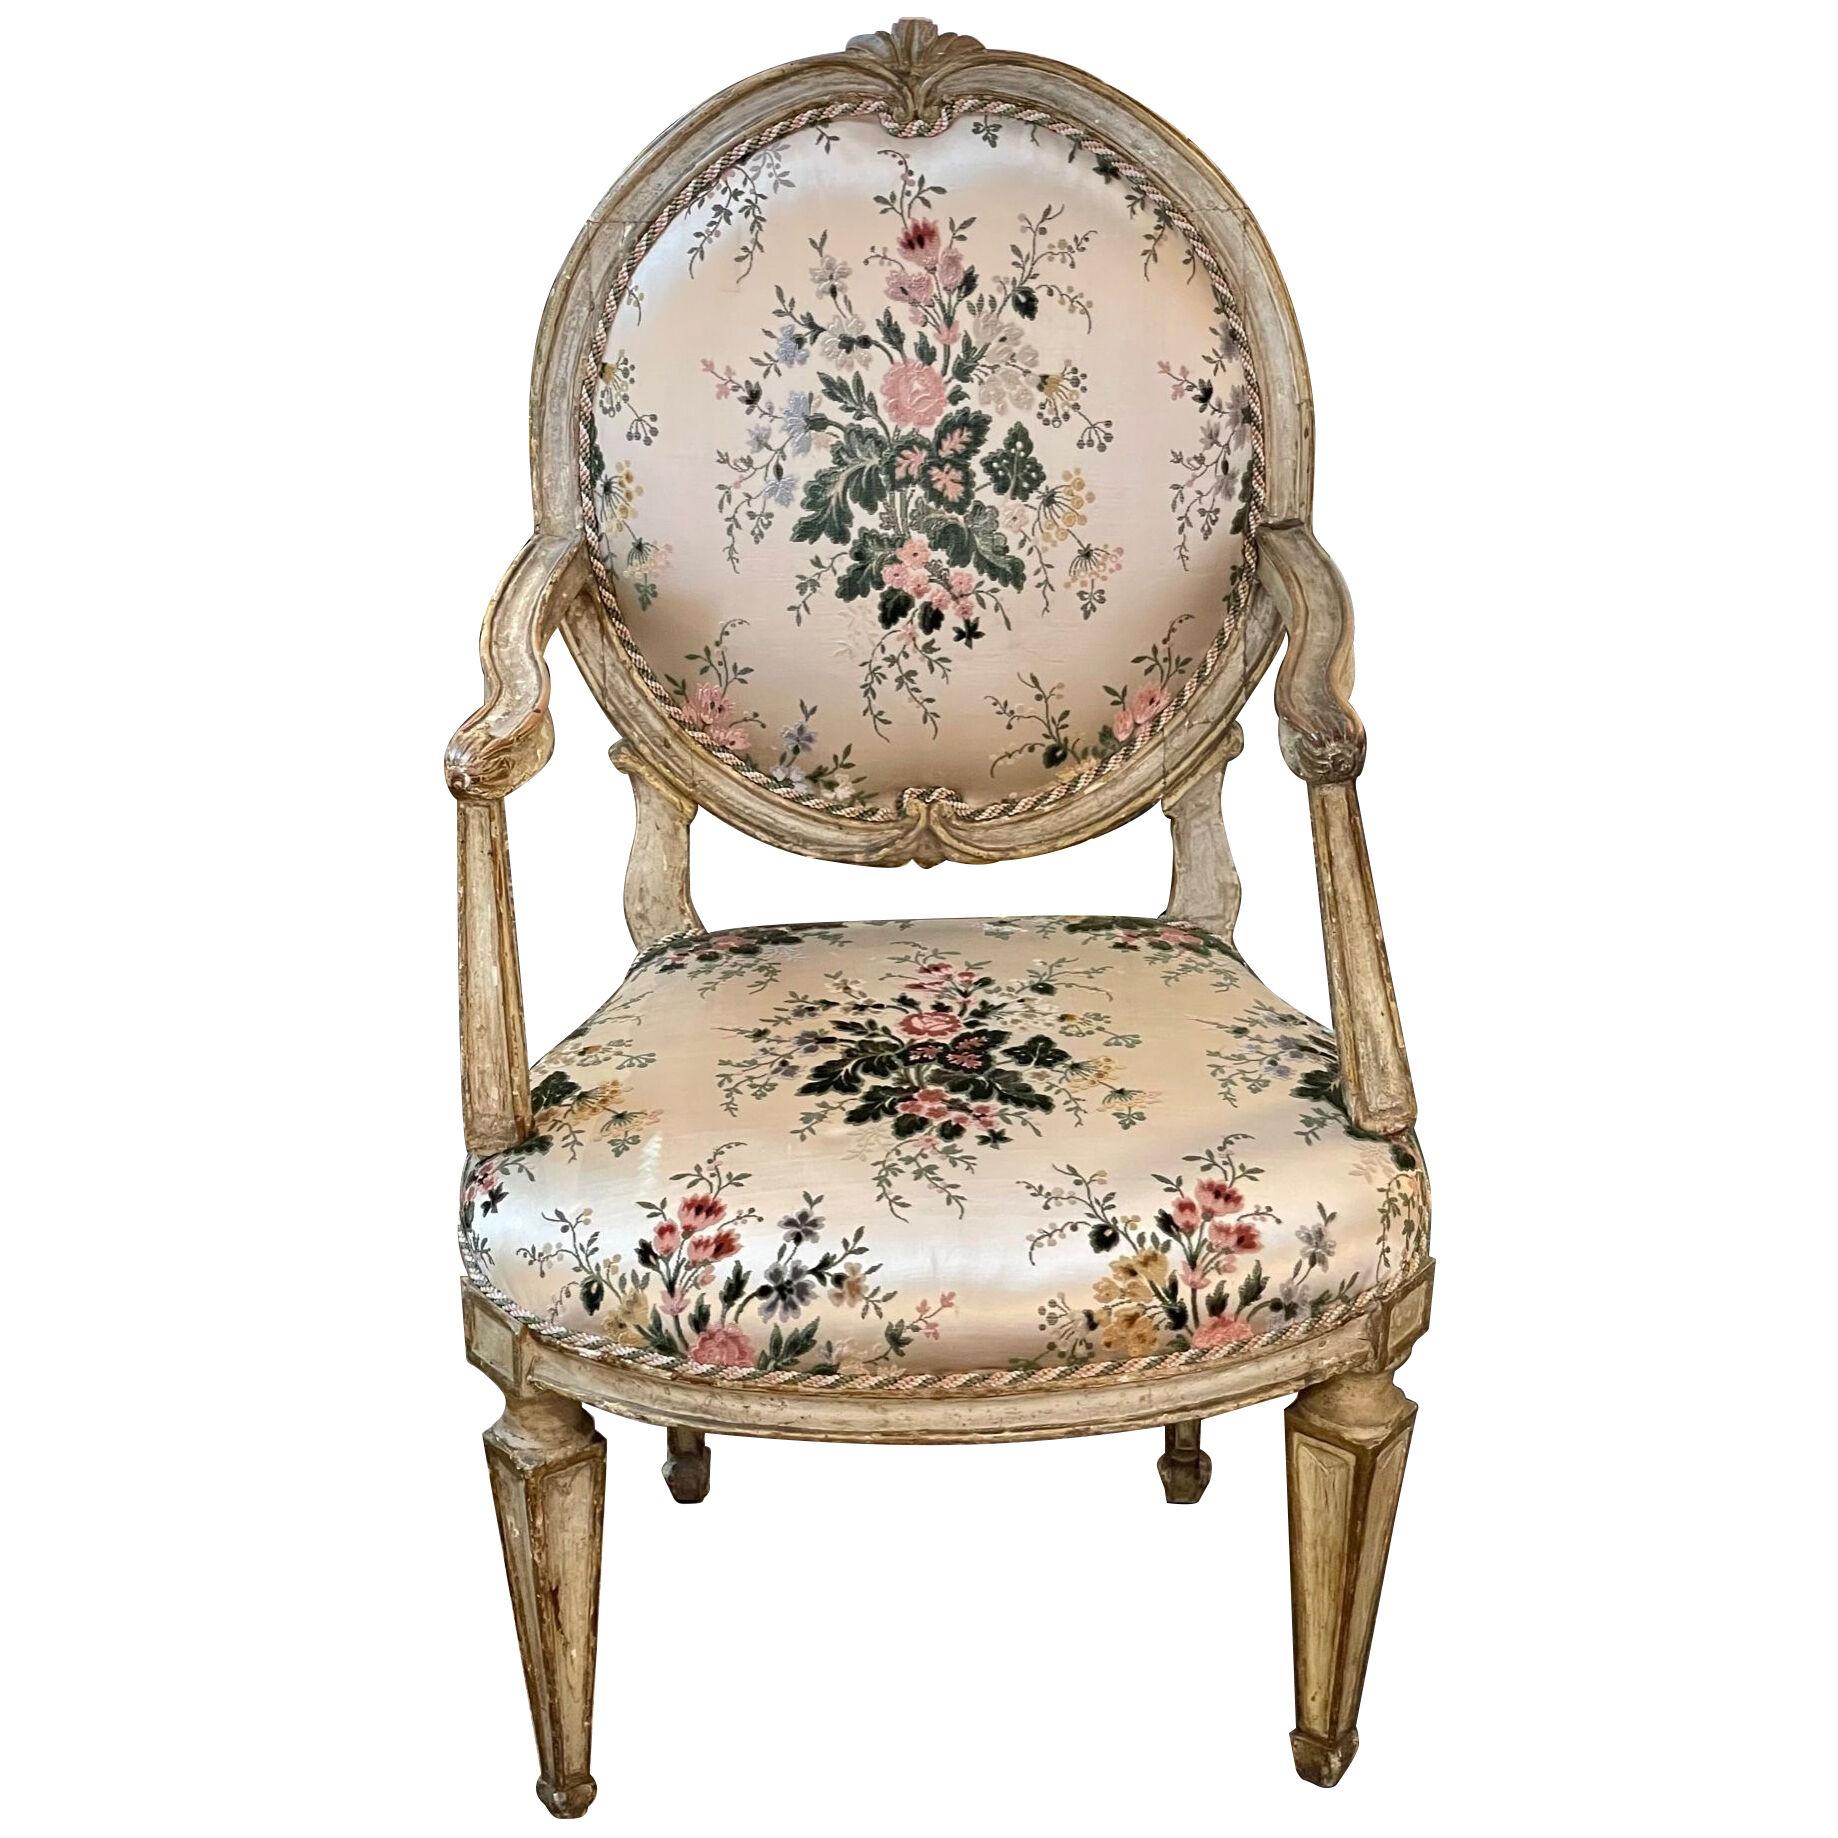 18th Century Italian Carved and Painted Armchair with Floral Upholstery